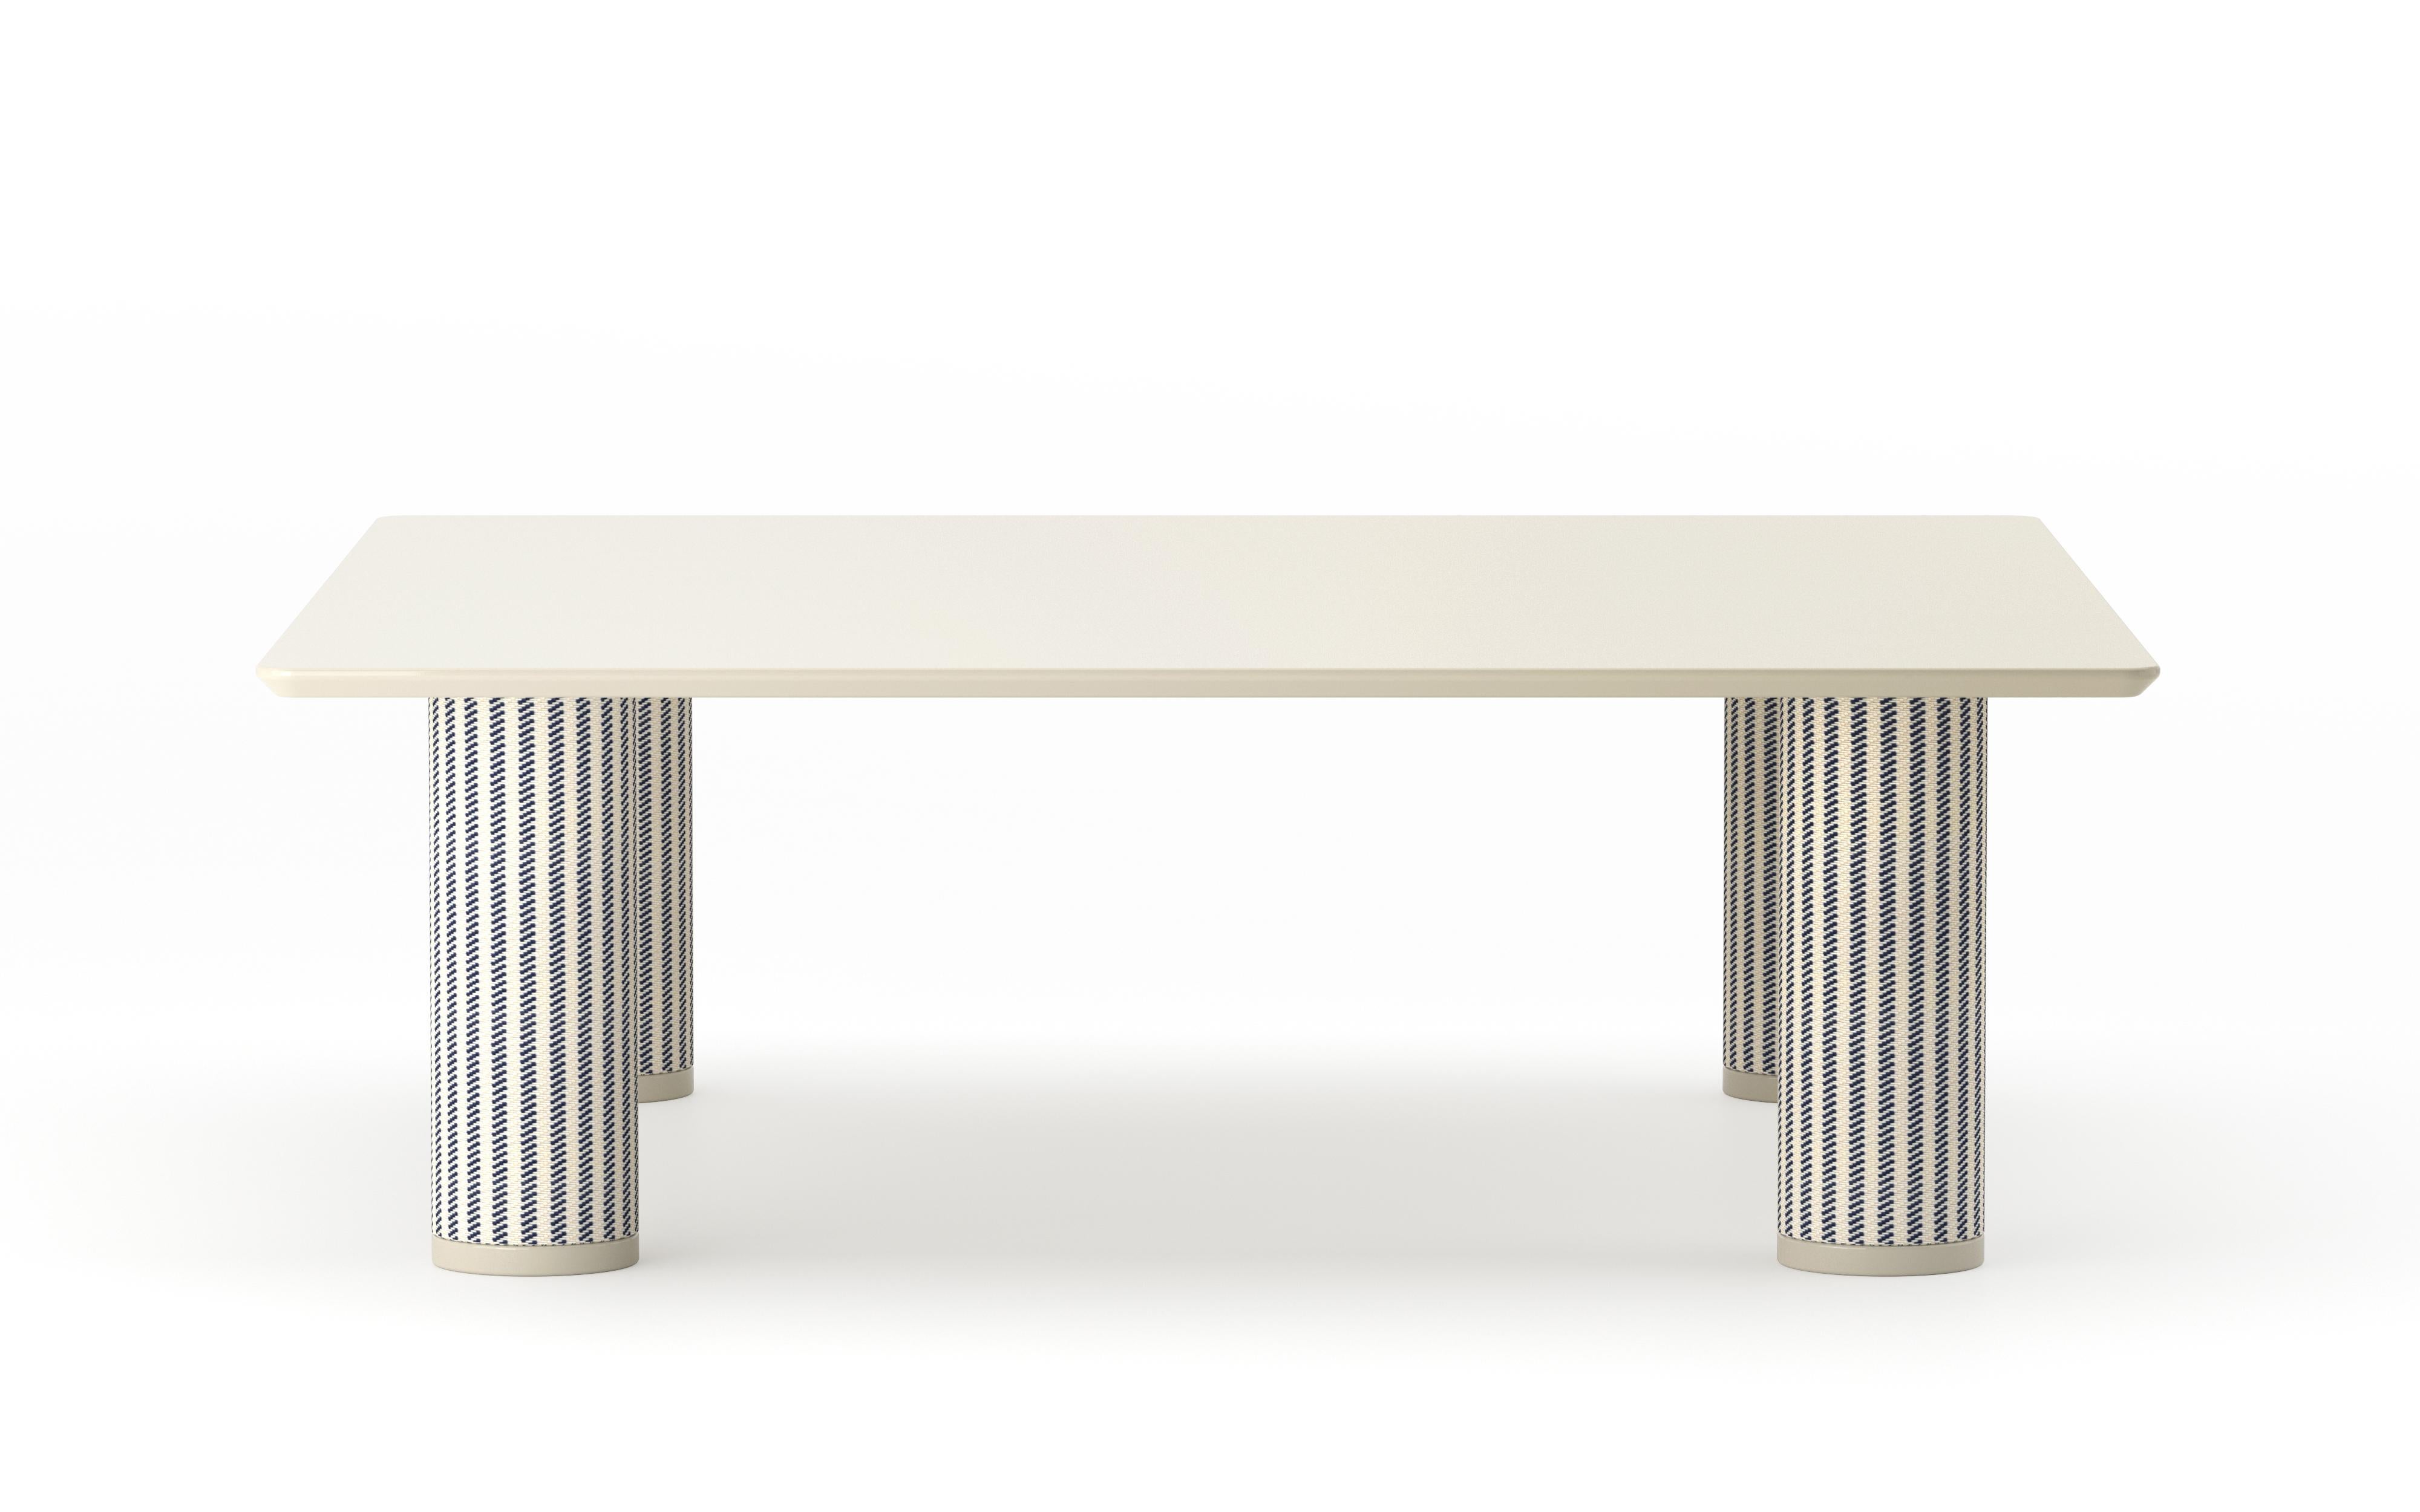 UMA Square is a low table from the collection of the same name designed by Ludovica+Roberto Palomba for P + C Edizioni in spring 2022. Measures: 90x90x30 cm.
Featuring a square resin top, UMA Square puts the design accent on the table’s cylindrical